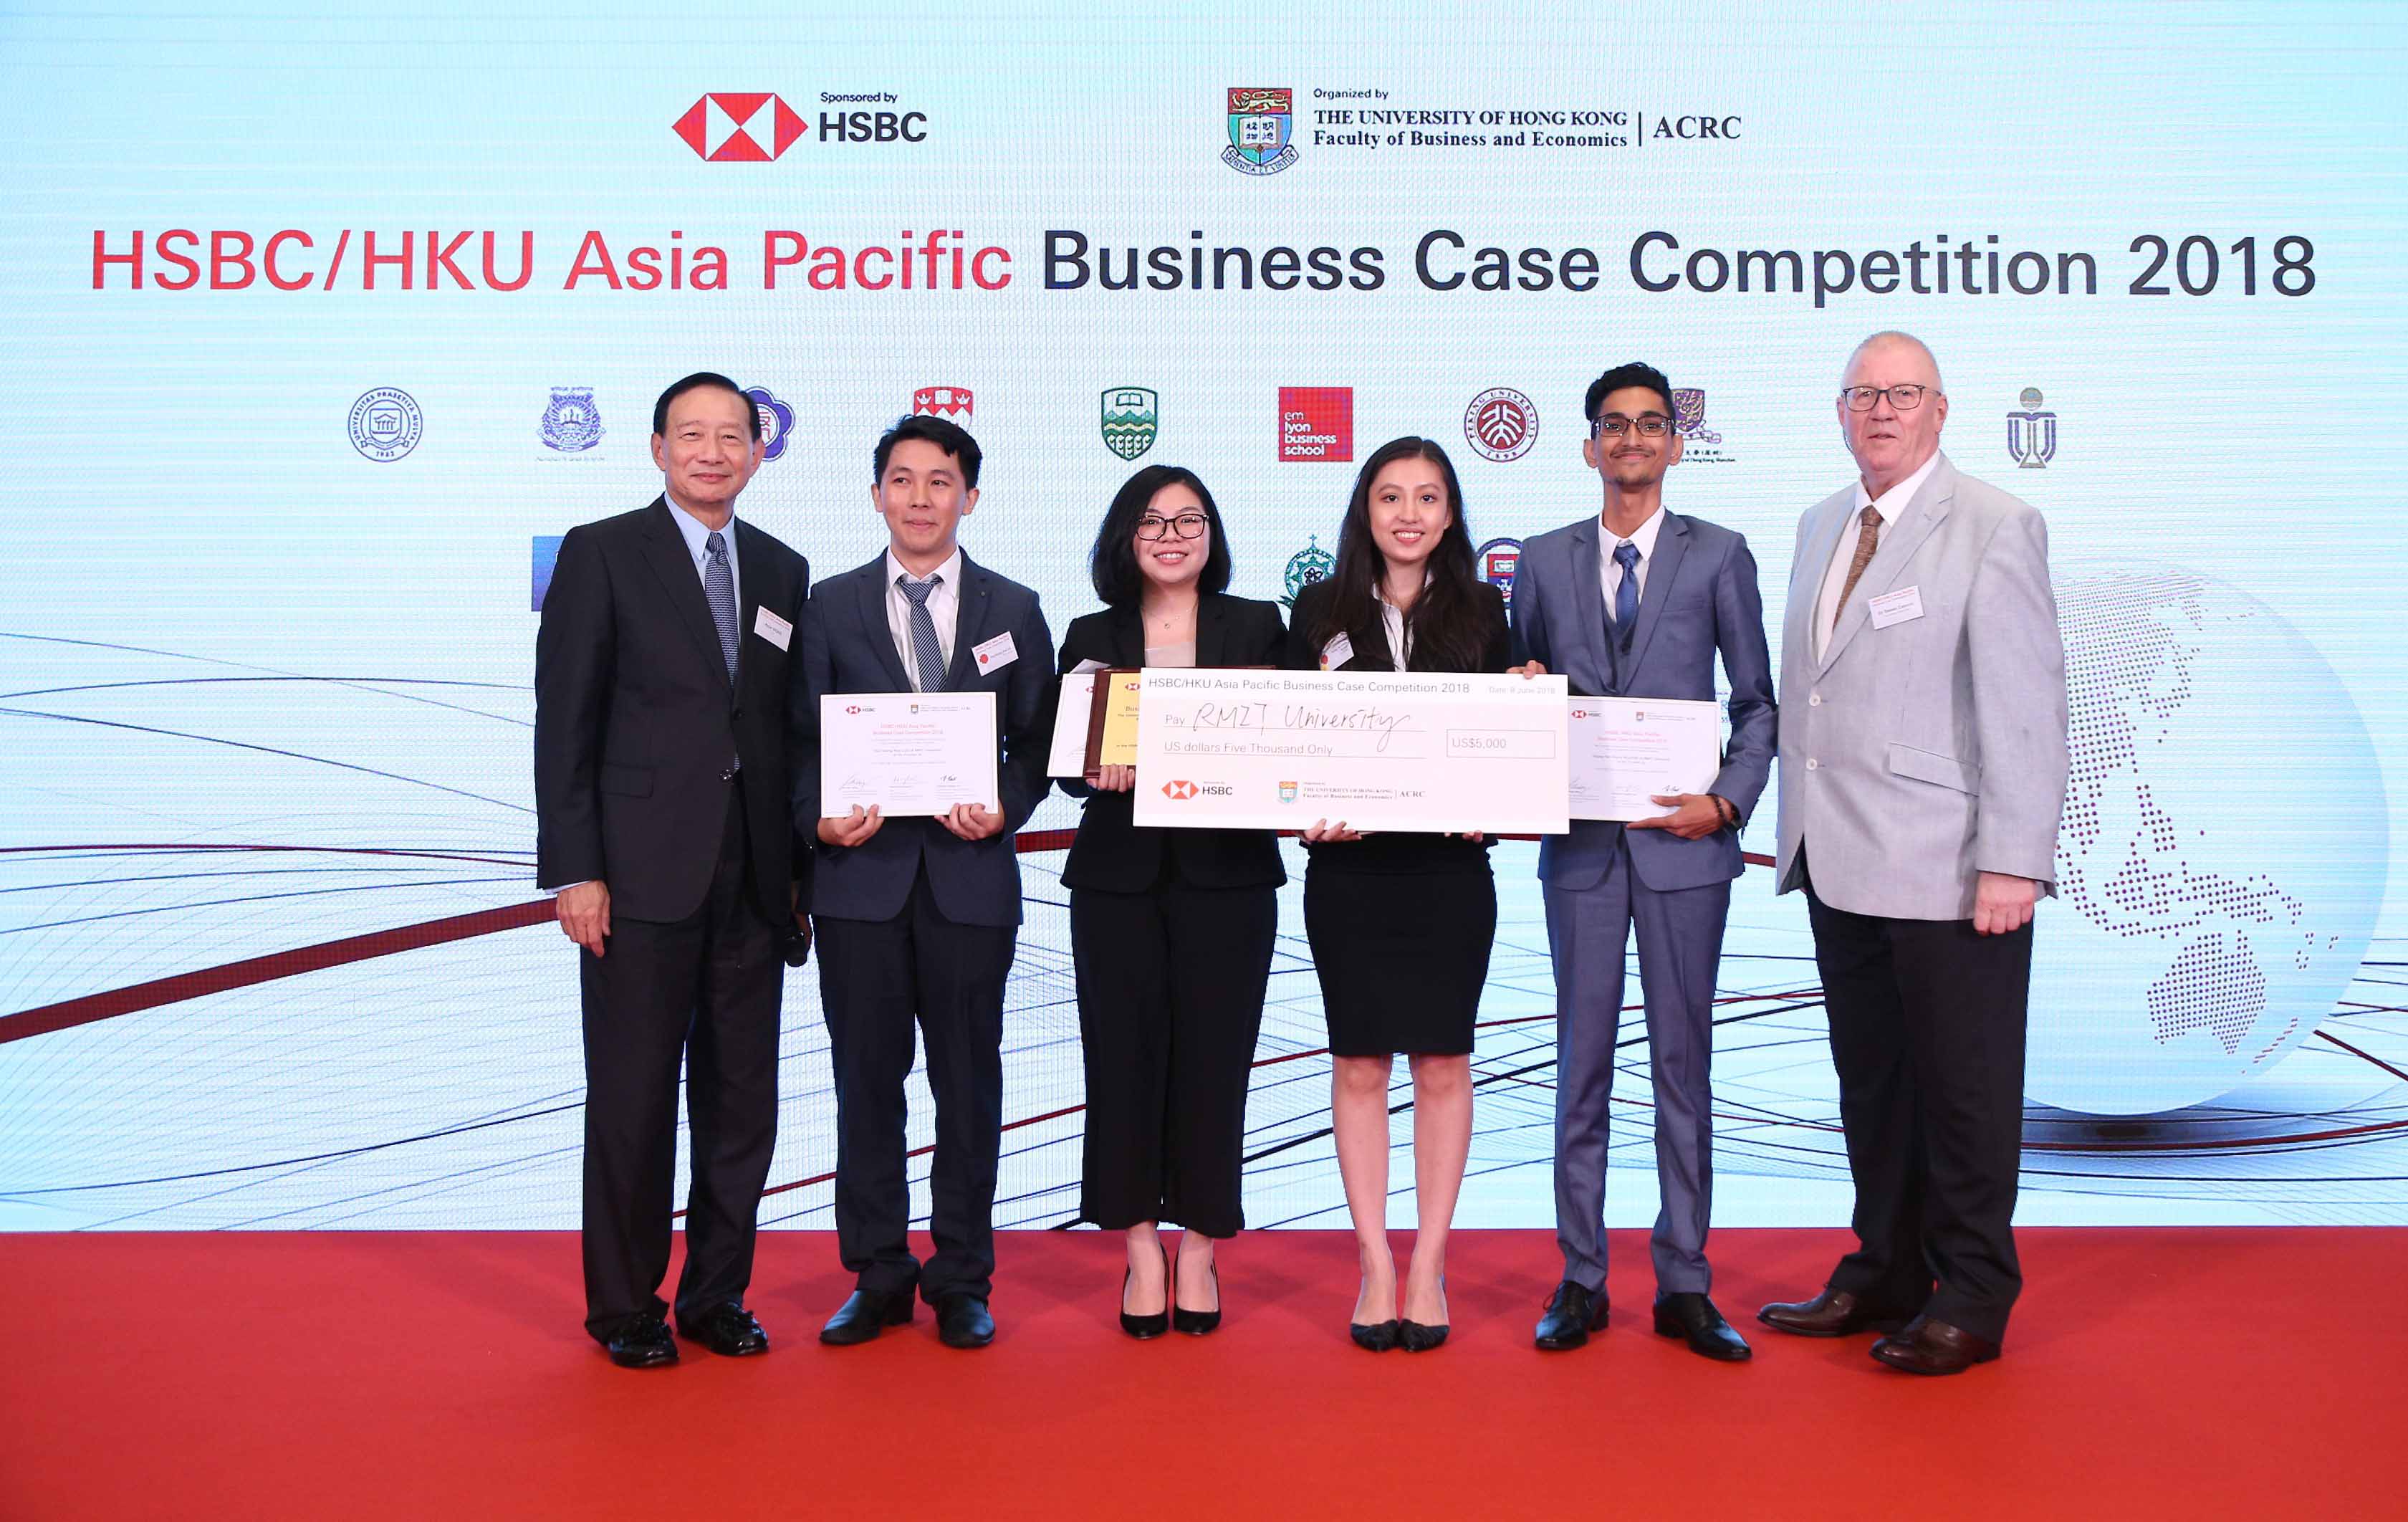 RMIT Vietnam’s student team was awarded the first runner-up in the final round of the world’s largest business case competition for undergraduate students -- HSBC/HKU Asia Pacific Business Case Competition in Hong Kong.